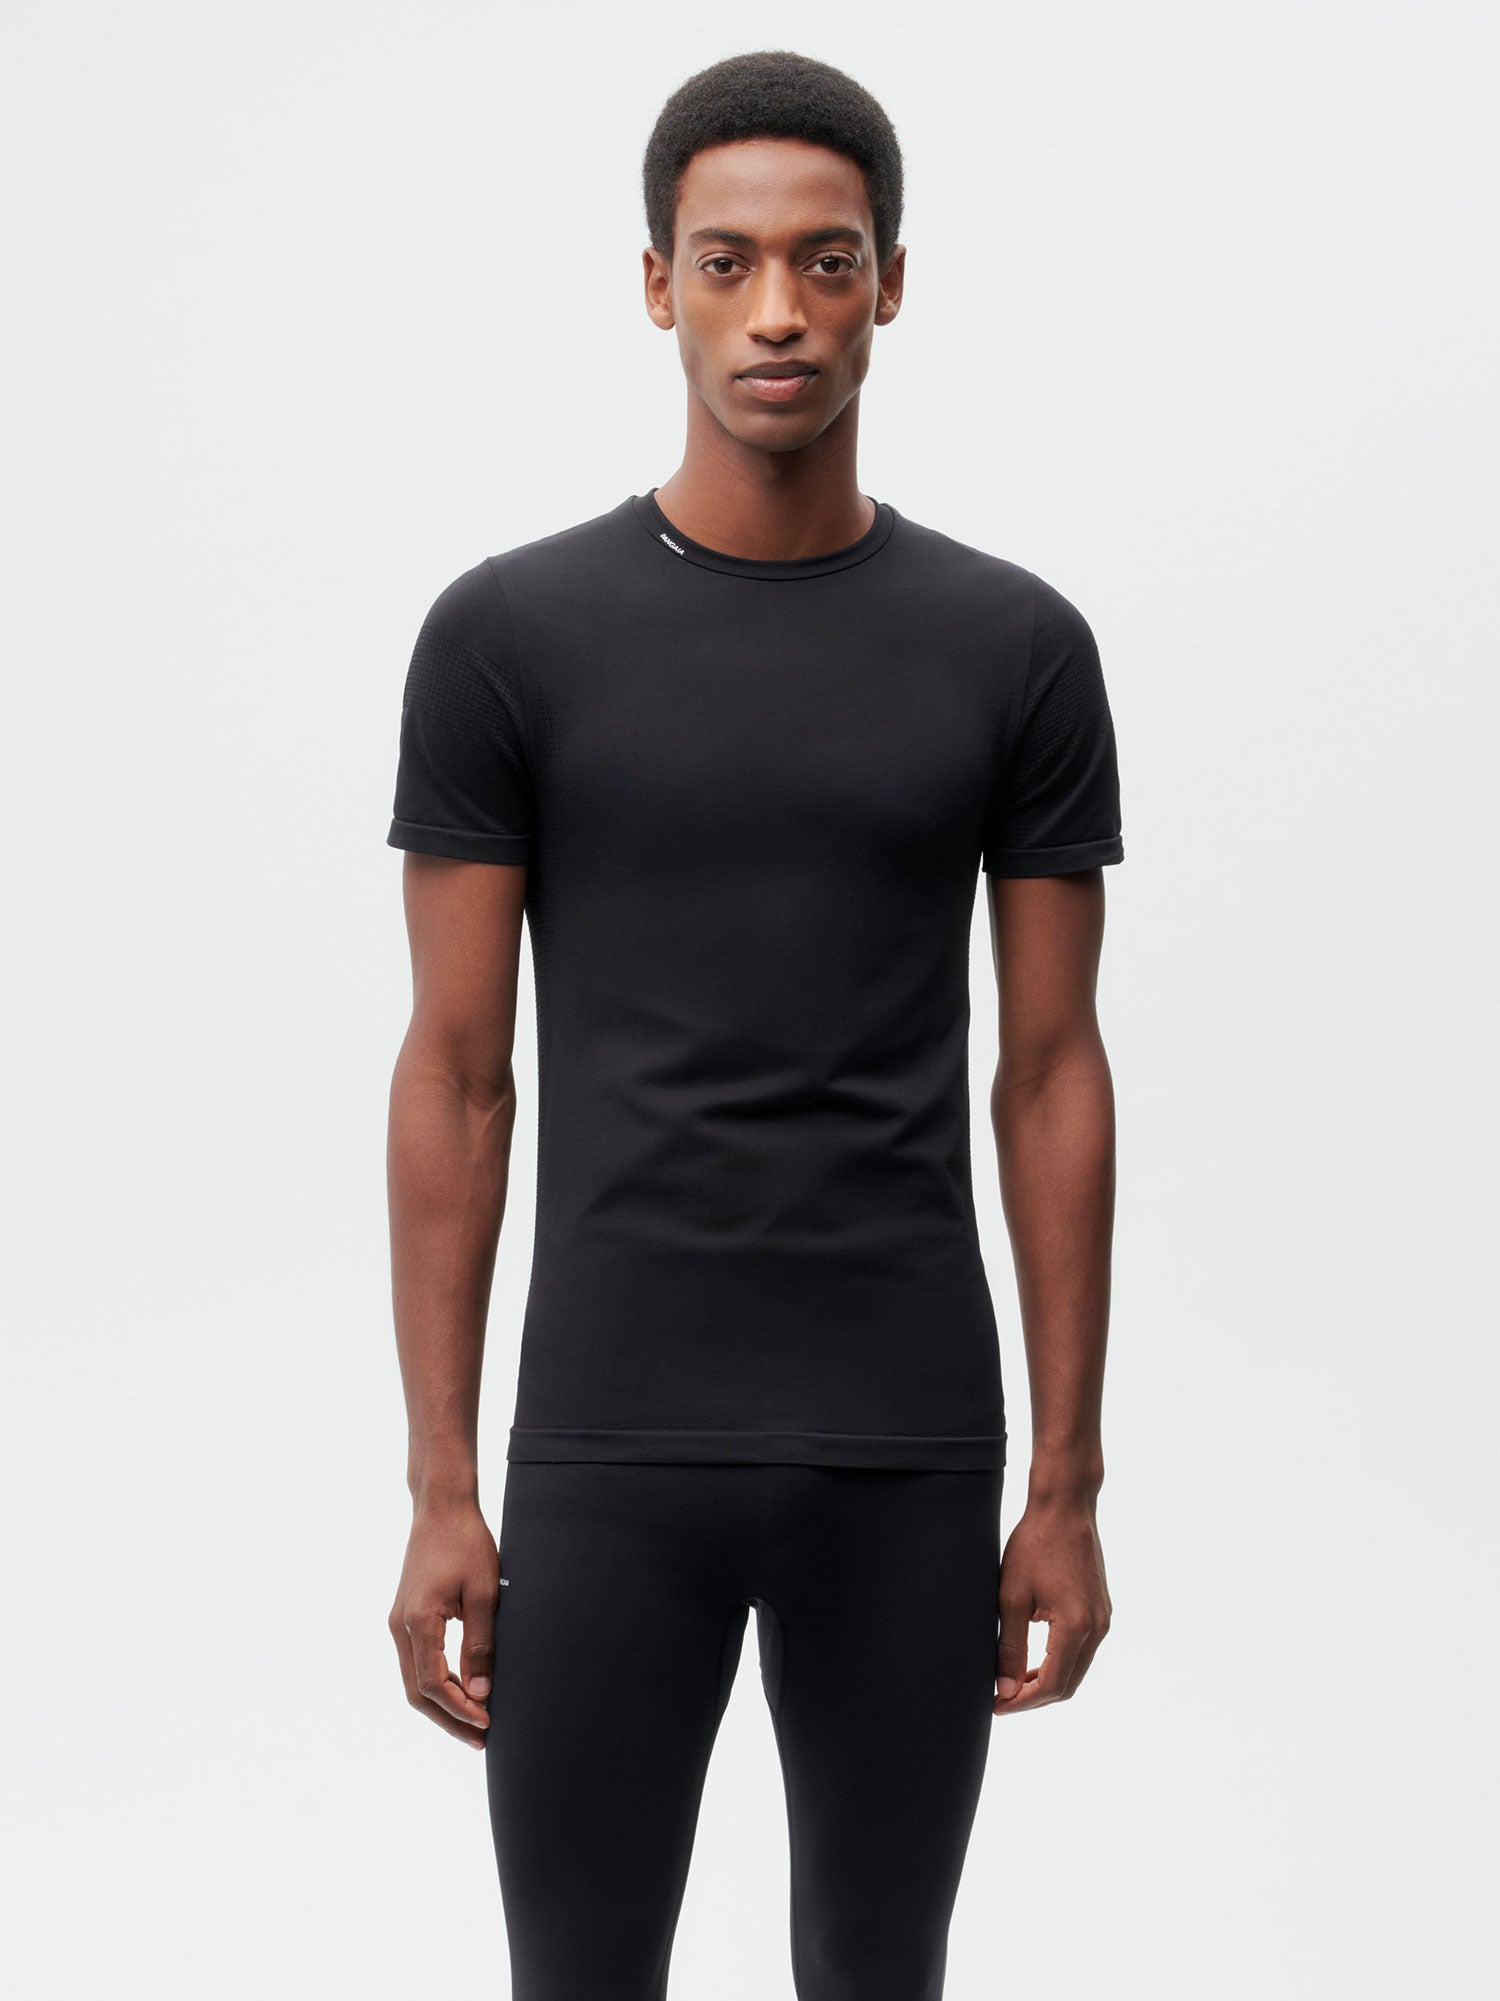 Activewear Mens Fitted T Shirt Black 